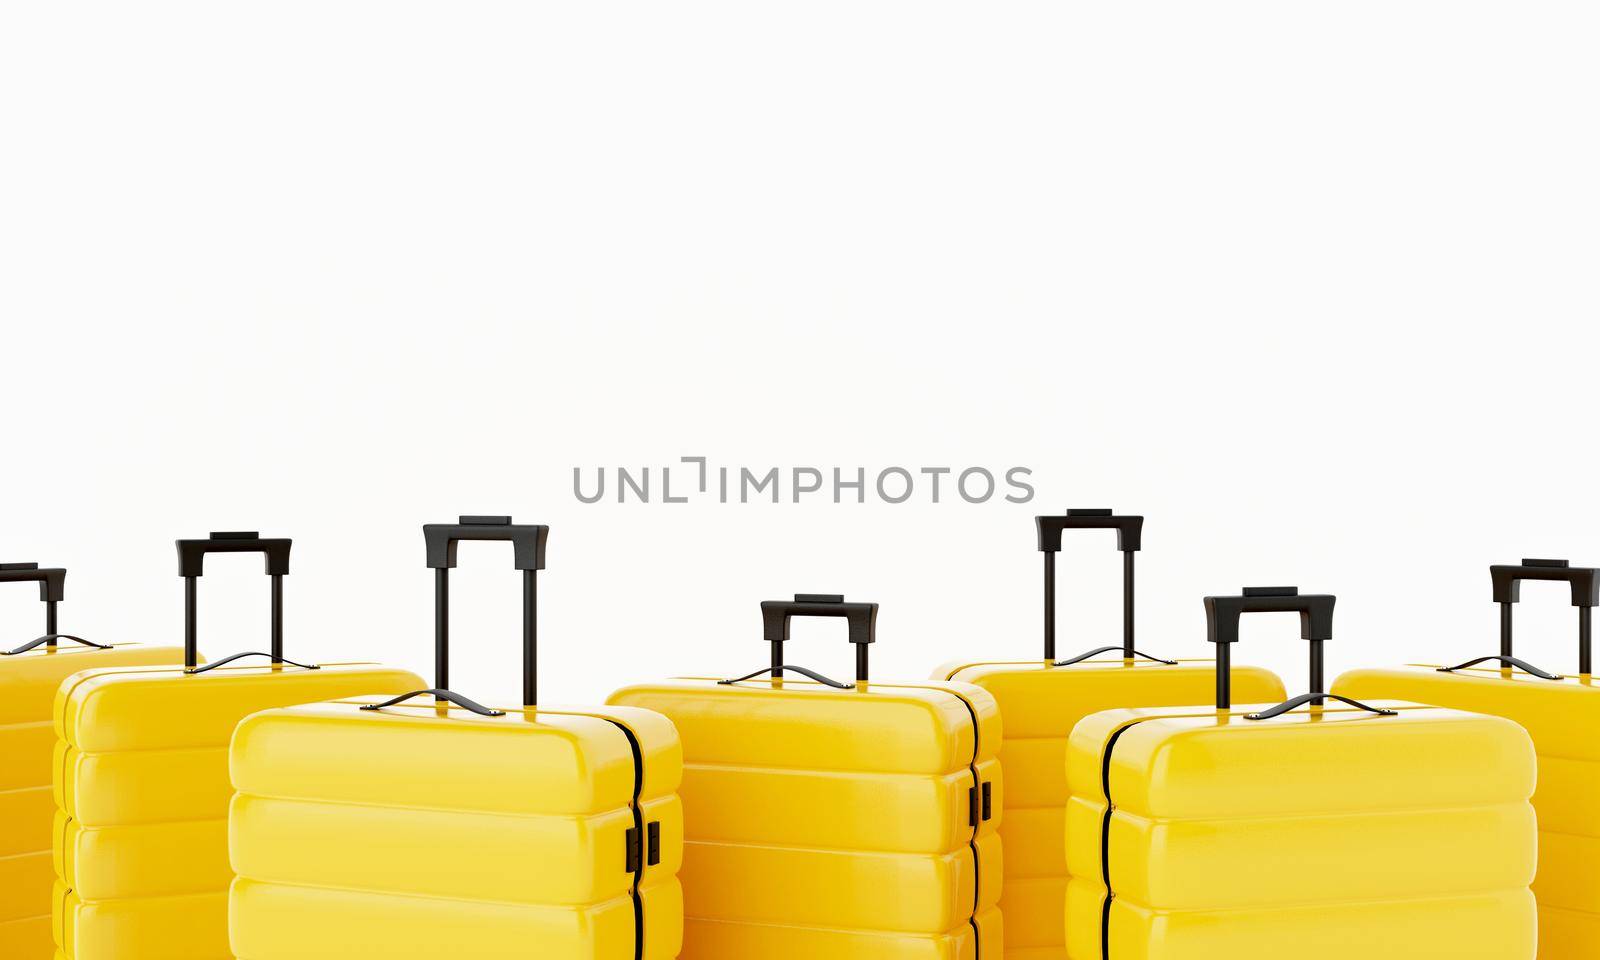 Group of yellow trolley roller suitcases with handle on isolated white background. Travel object and wanderlust concept. 3D illustration rendering